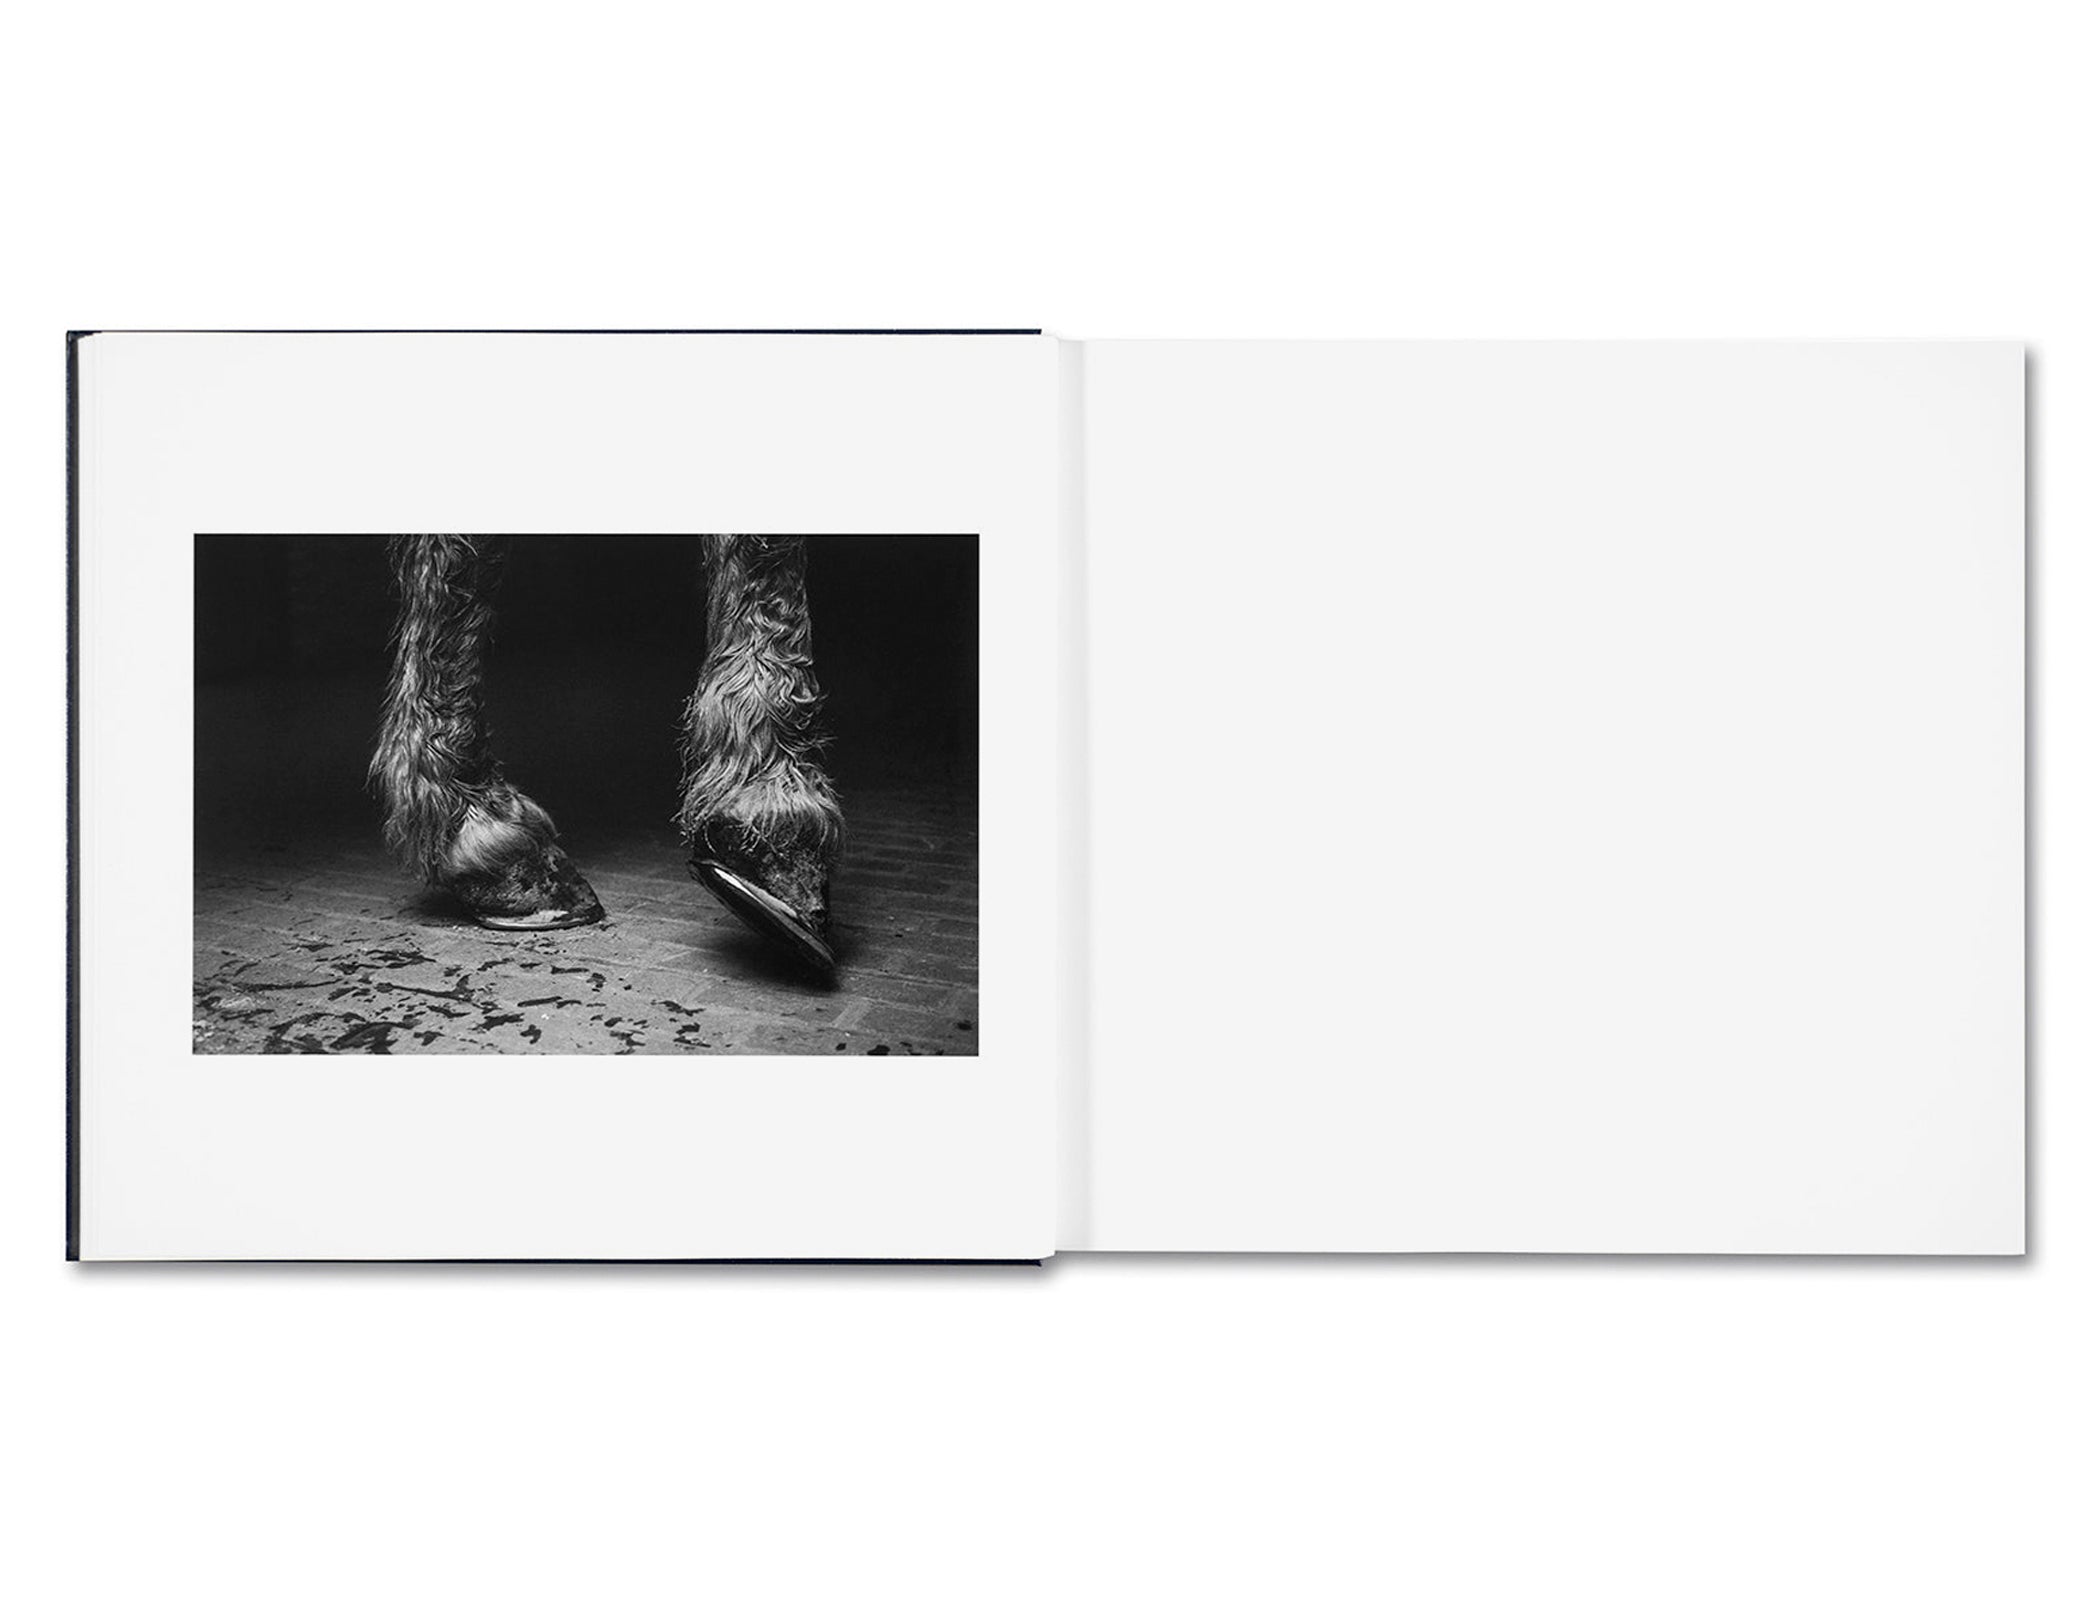 SOME SAY ICE by Alessandra Sanguinetti [SIGNED SLIP]